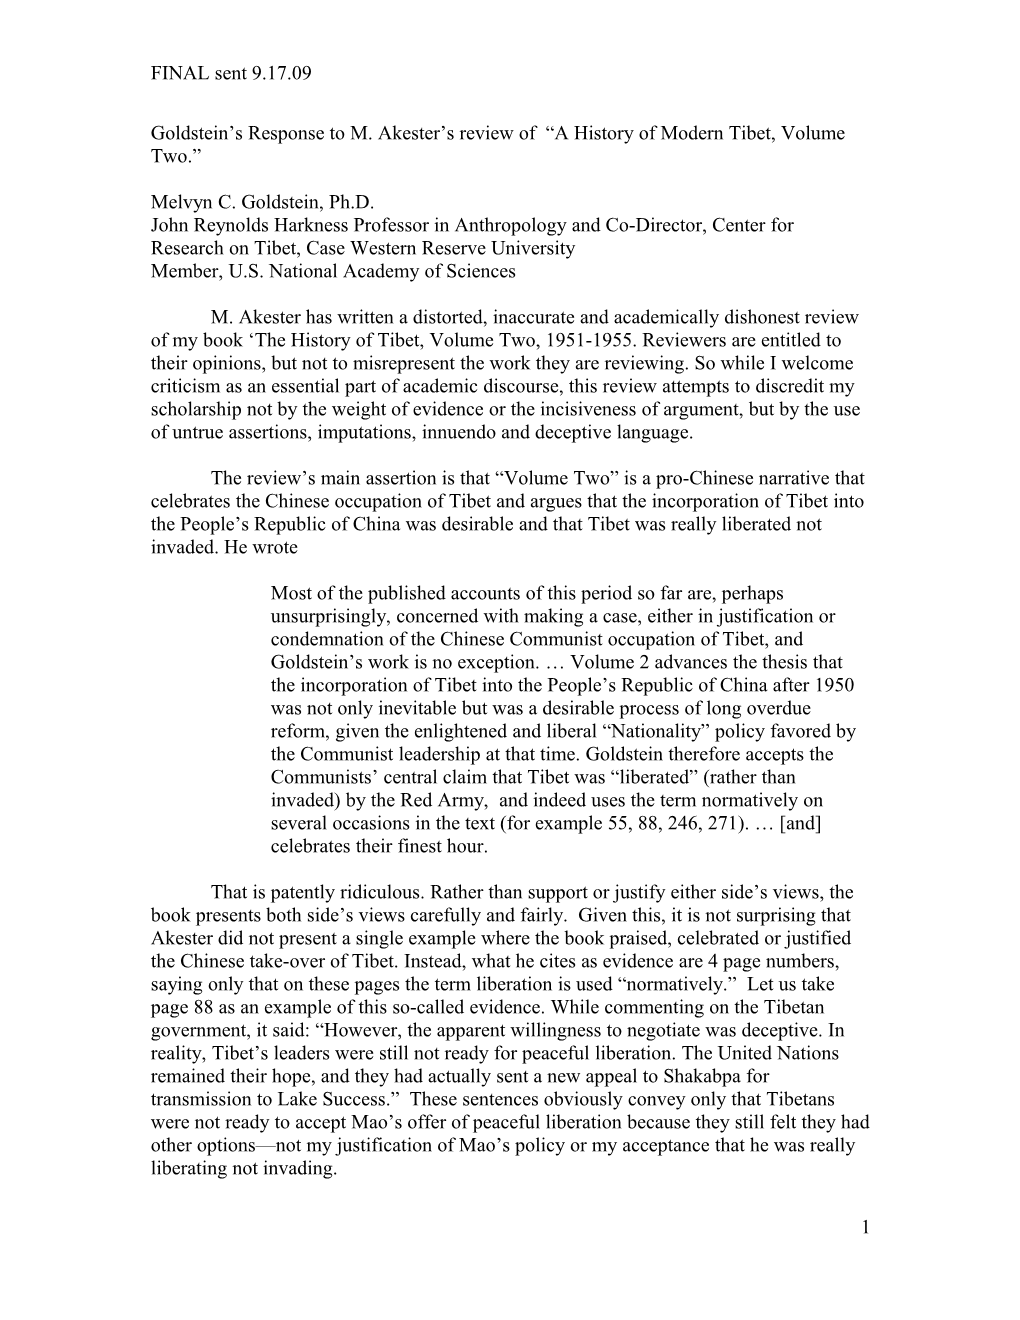 Goldstein S Response to M. Akester S Review of a History of Modern Tibet, Volume Two